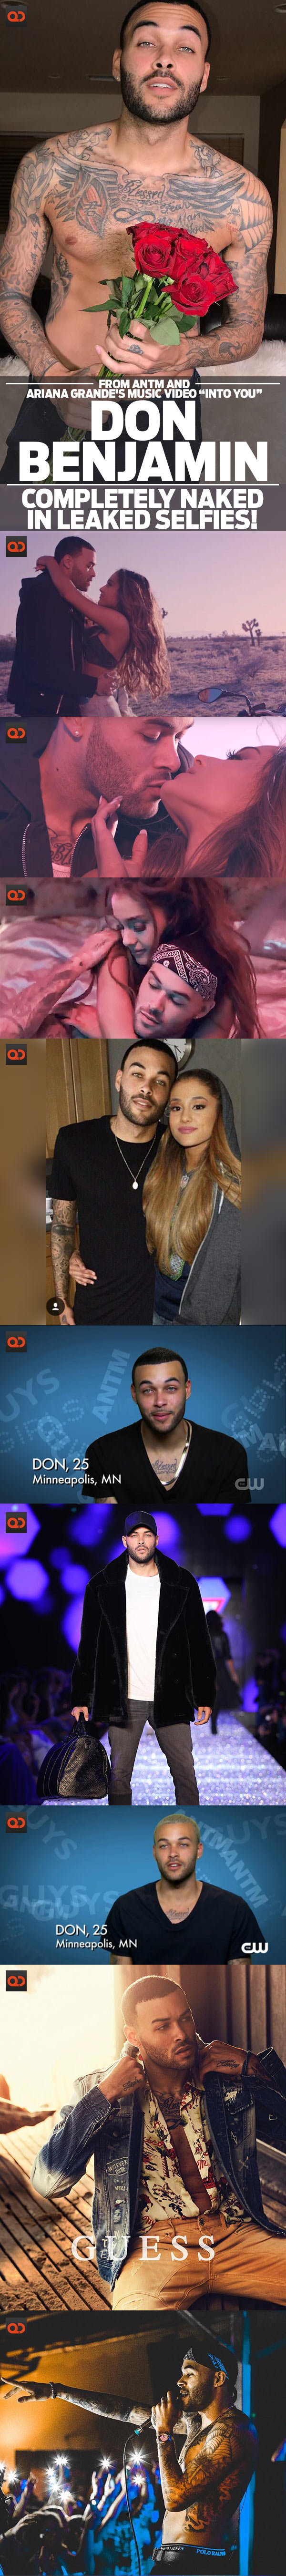 Don Benjamin, From ANTM And Ariana Grande's Music Video “Into You”, Completely Naked In Leaked Selfies!